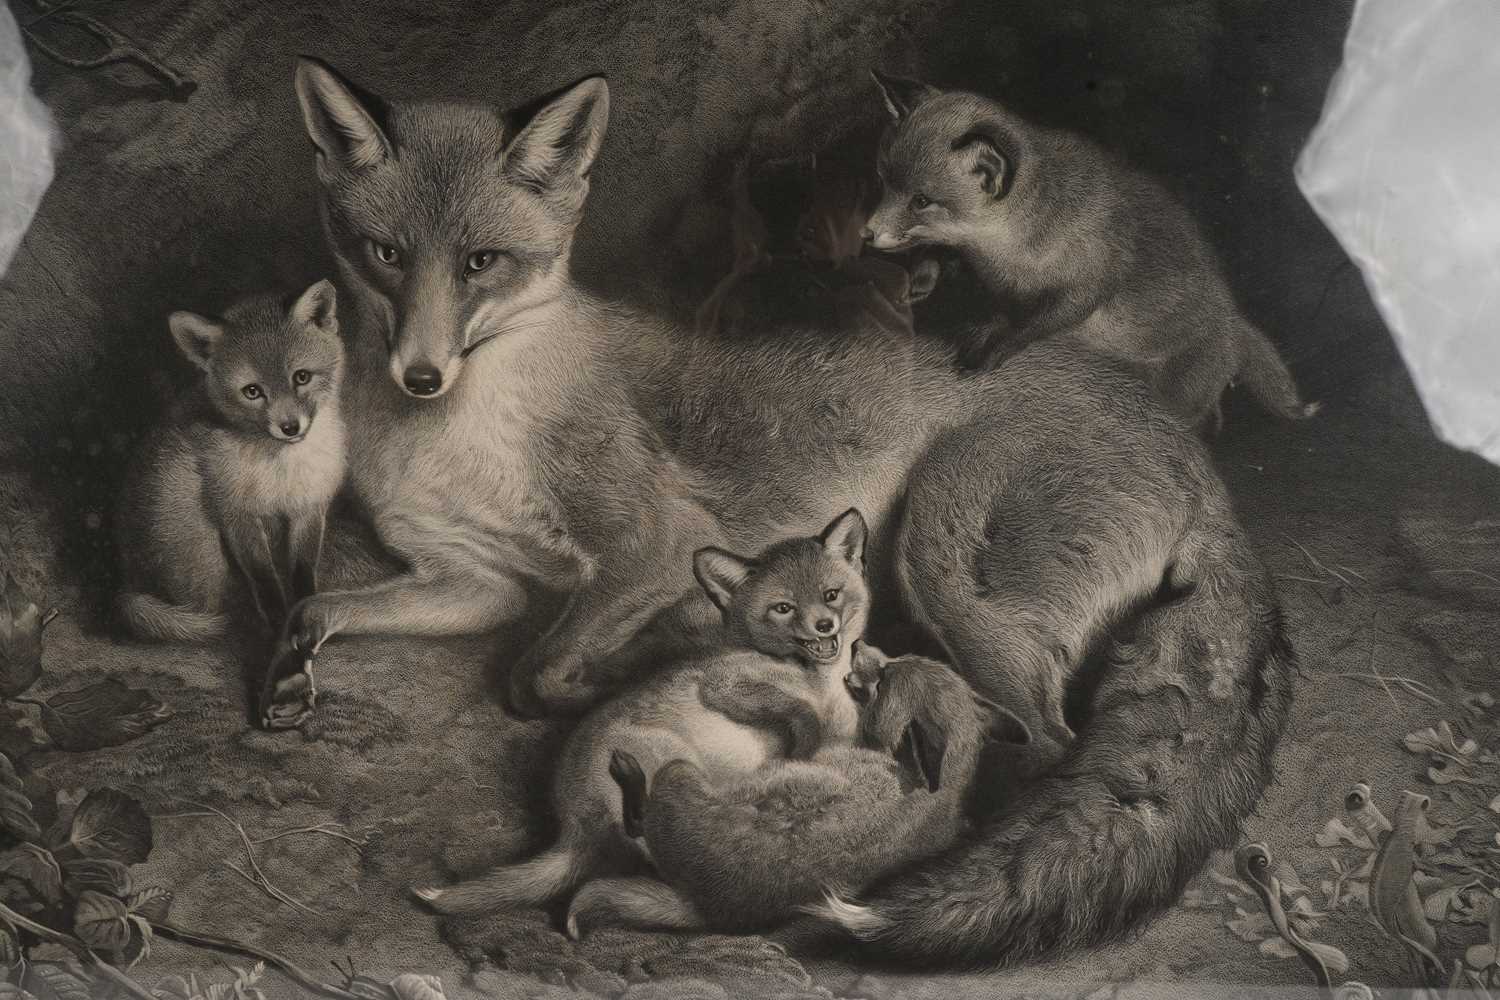 William Turner Davey - A Vixen Fox and Her Cubs | stipple engraving - Image 3 of 6